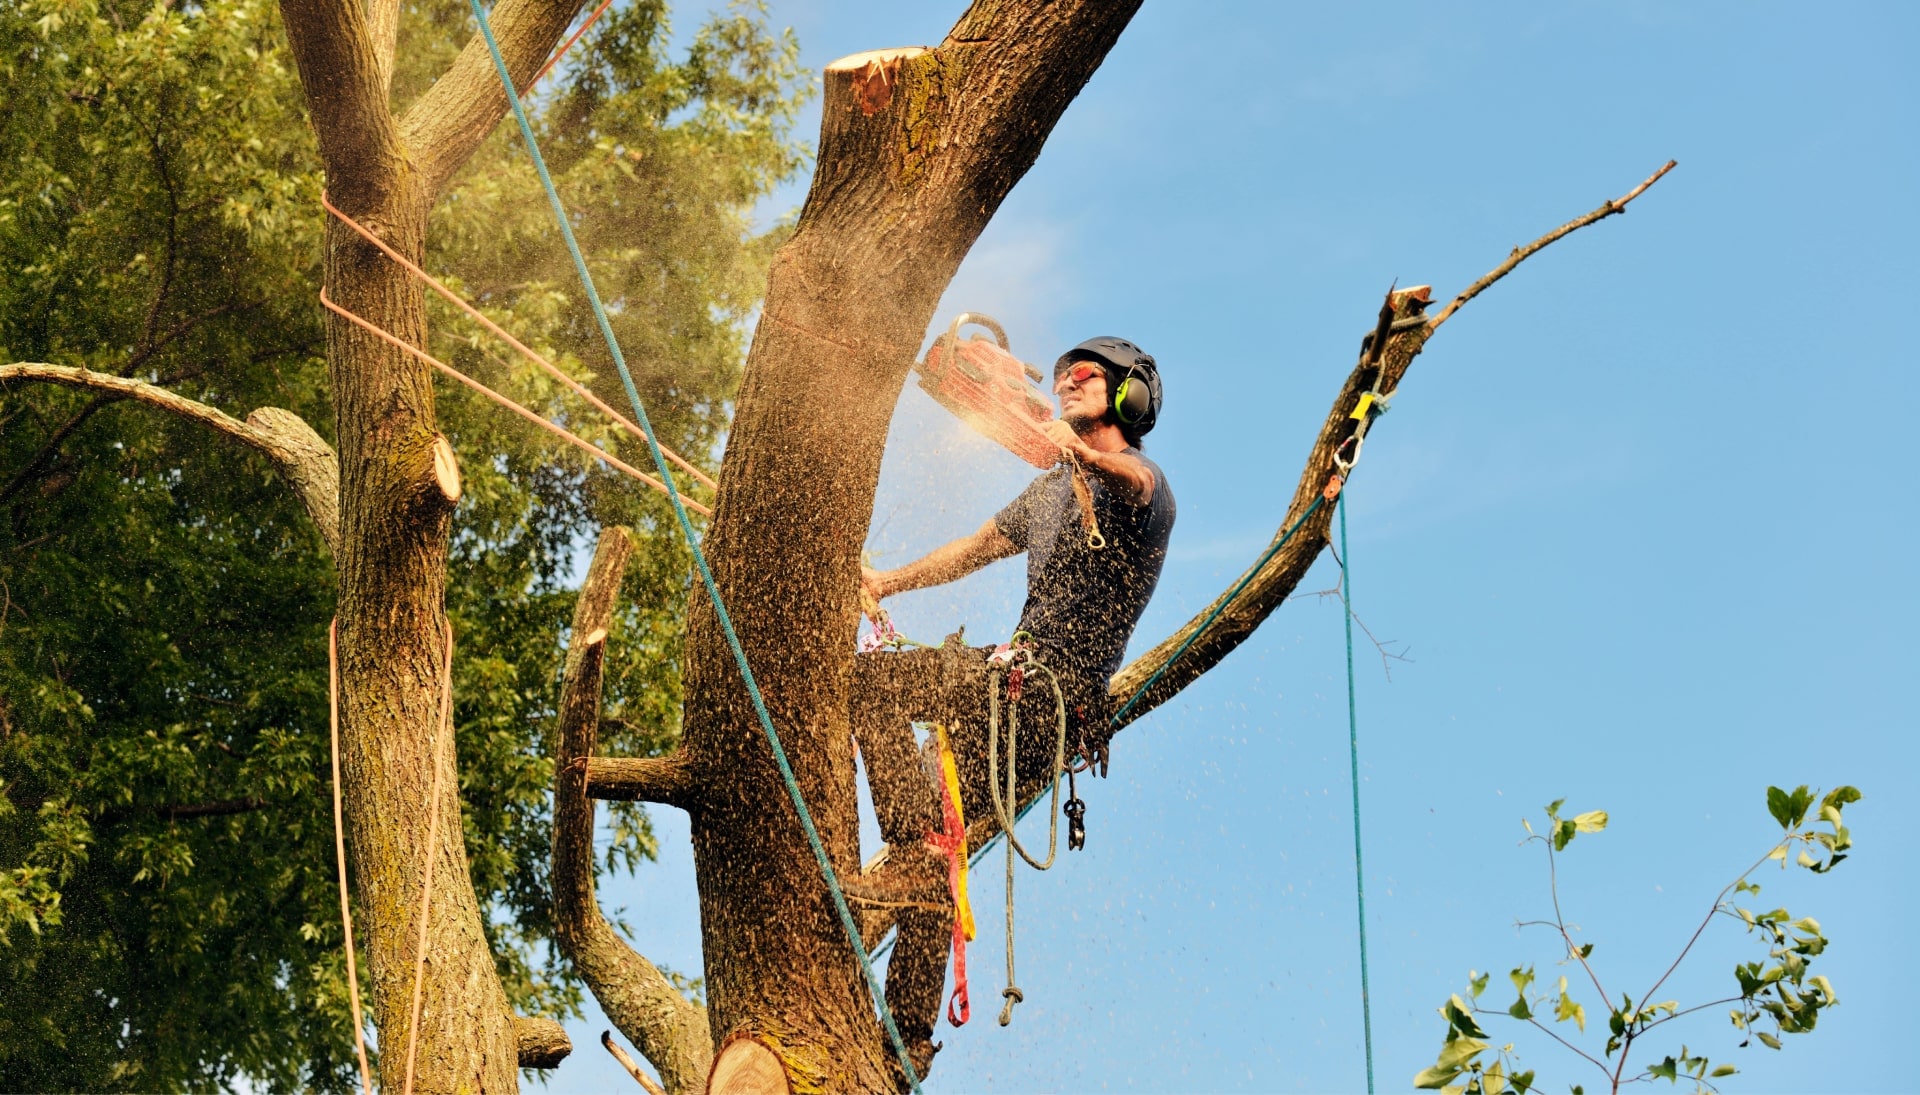 Davenport tree removal experts solve tree issues.